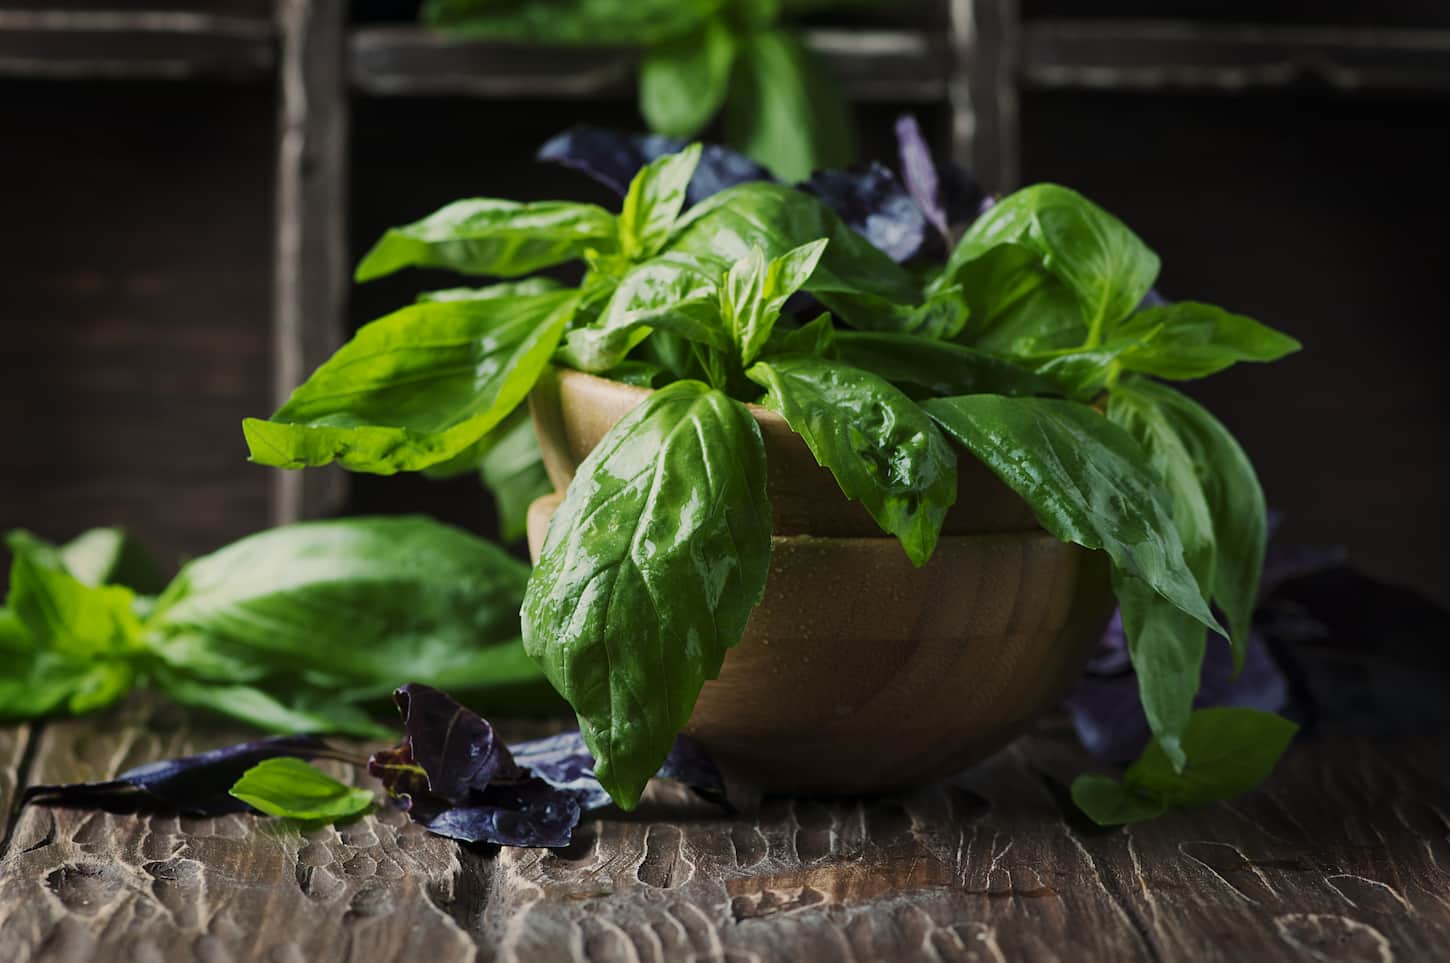 An image of a bunch of fresh basil on the vintage table, selective focus.